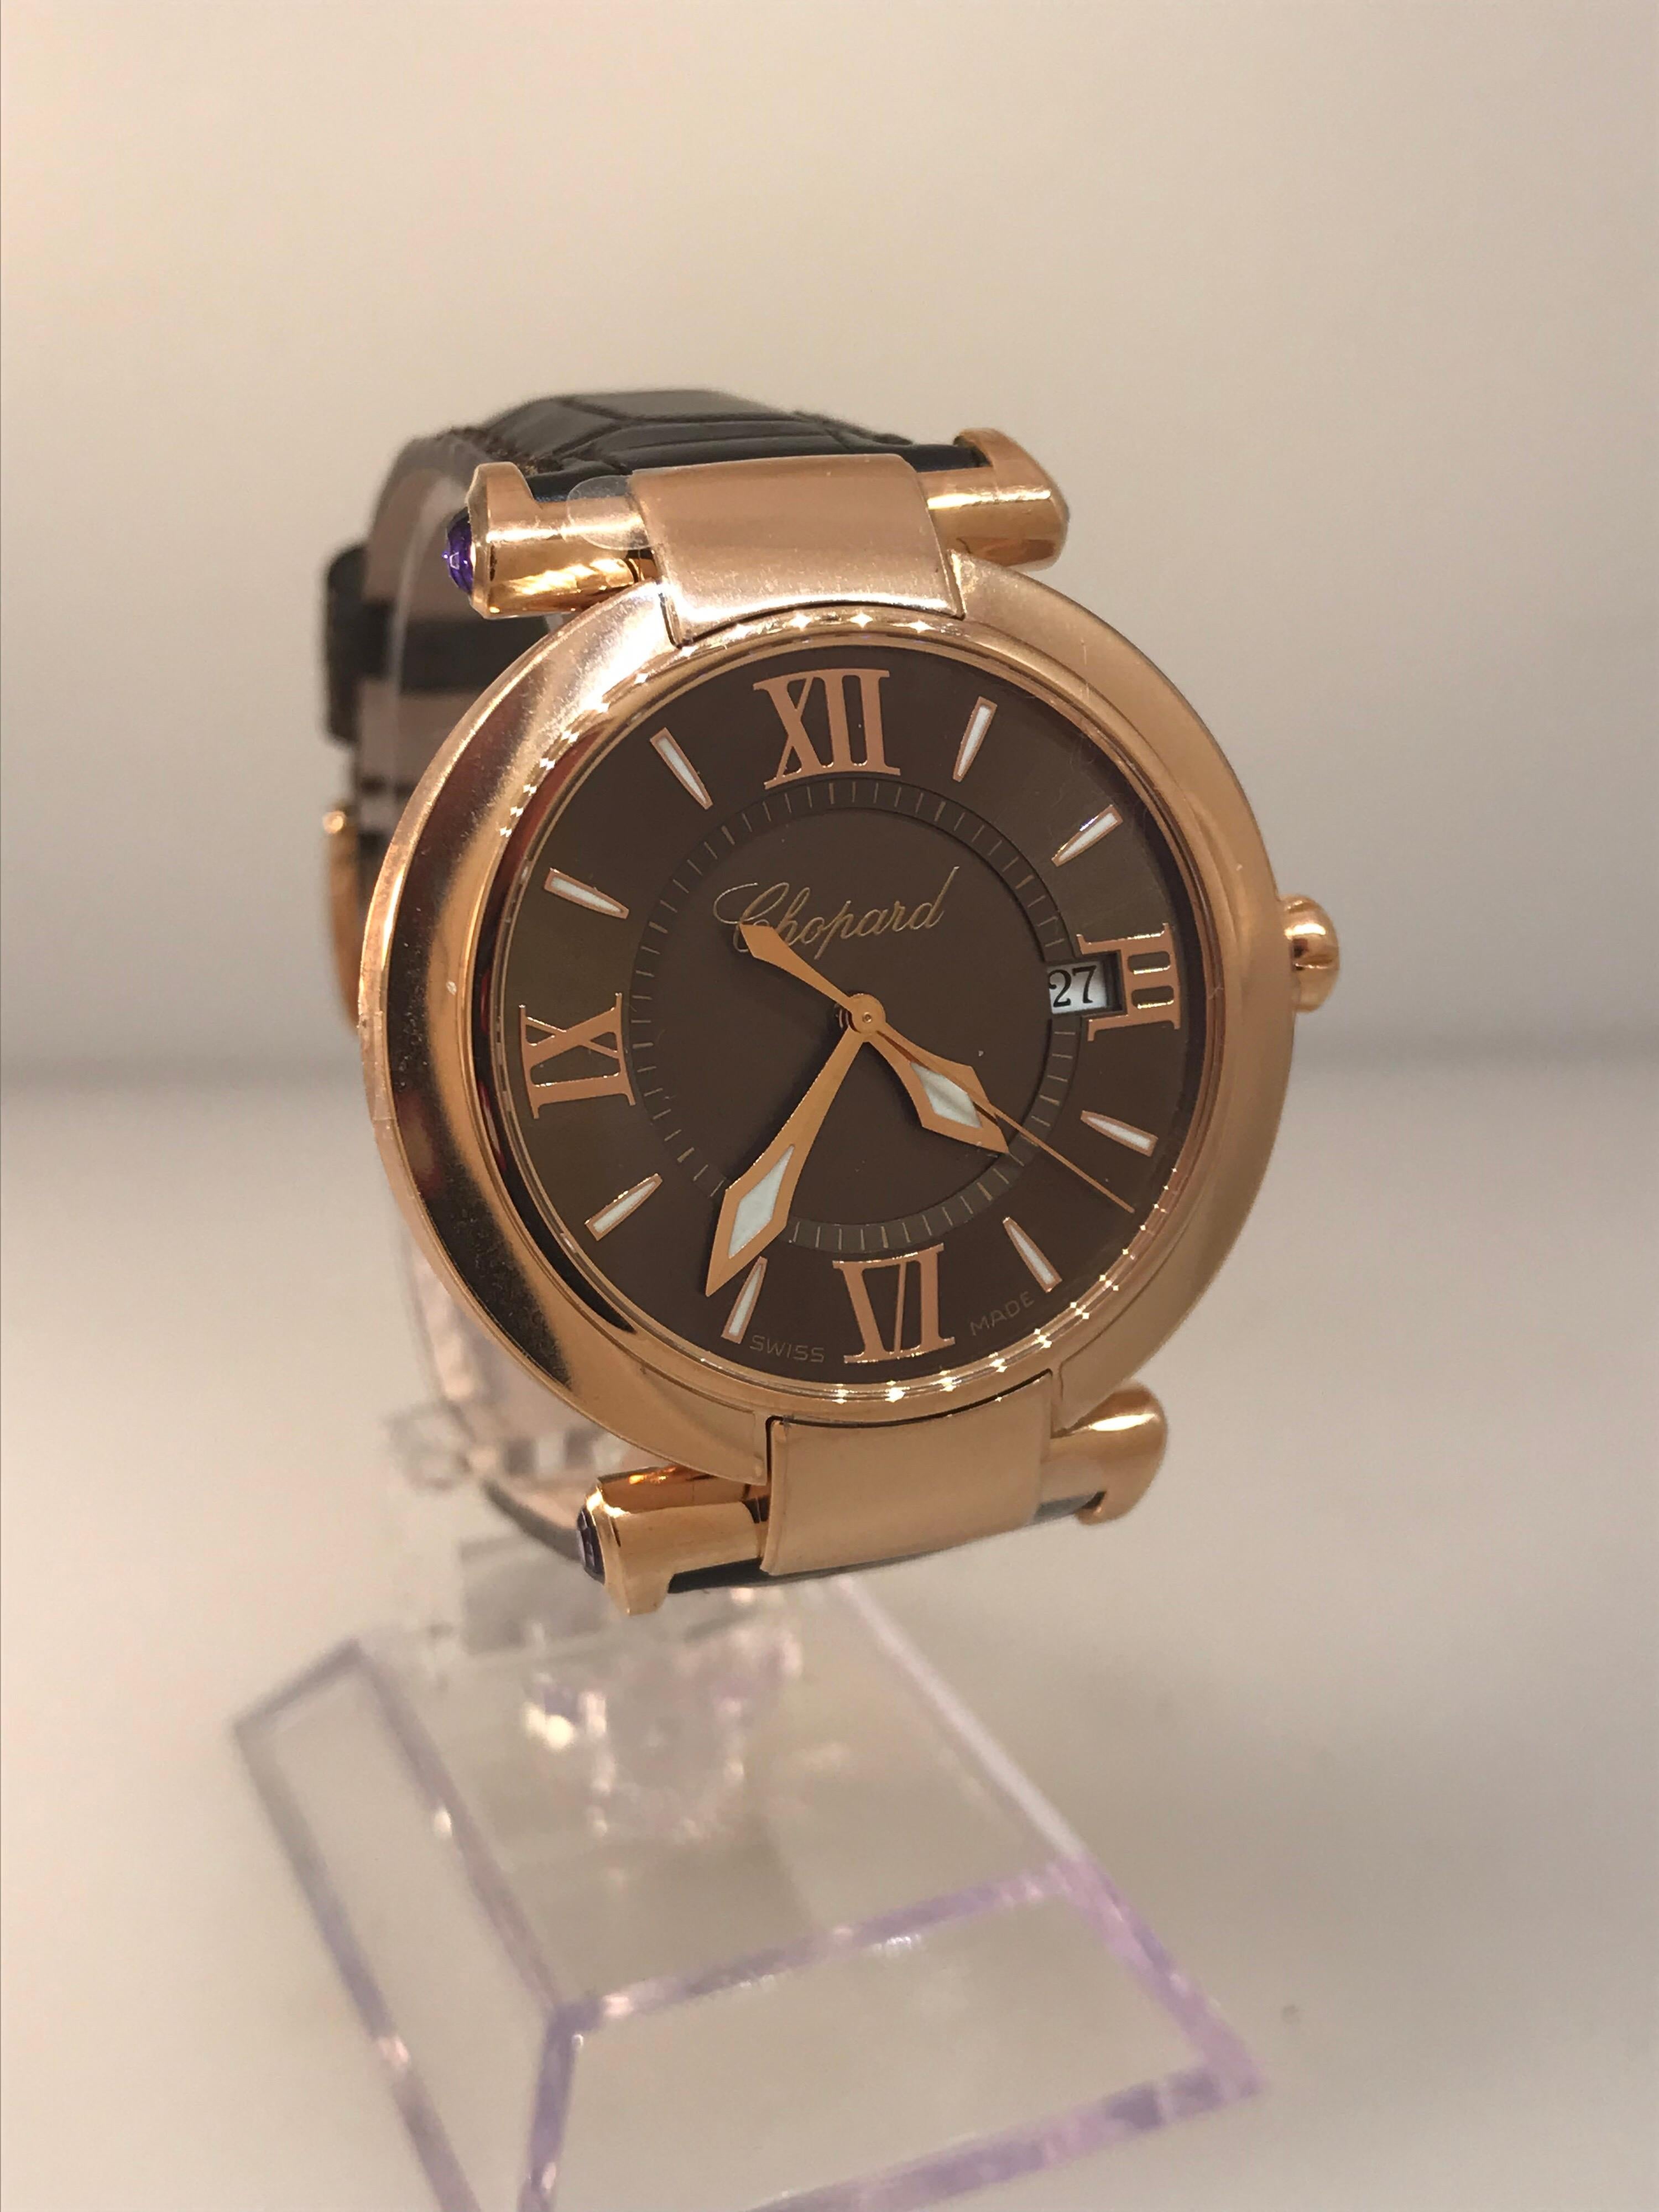 Chopard Imperiale Ladies Watch

Model Number: 38/4221-5009

100% Authentic

Brand New

Comes with original Chopard box, certificate of authenticity and warranty and instruction manual

18 Karat Rose Gold Case (48.30gr)

Scratch Resistant Sapphire